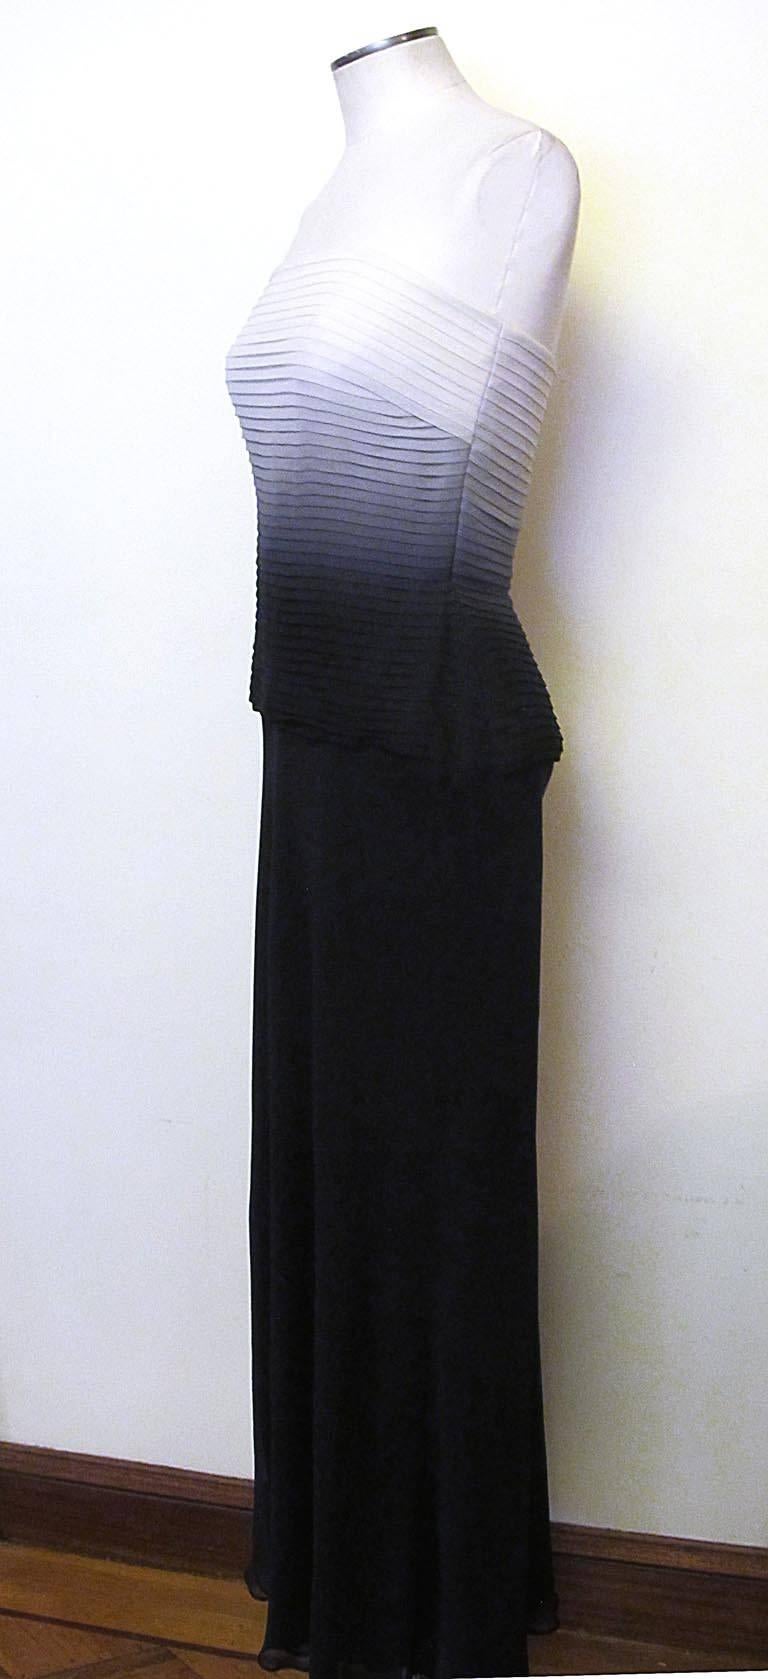 This fabulous Melinda Eng strapless evening gown has a pleated bodice and bias cut skirt. The ombre effect fades from white to black in beautiful 100% 
silk chiffon. The dress is in excellent condition and tag is still attached.

*Your Purchase